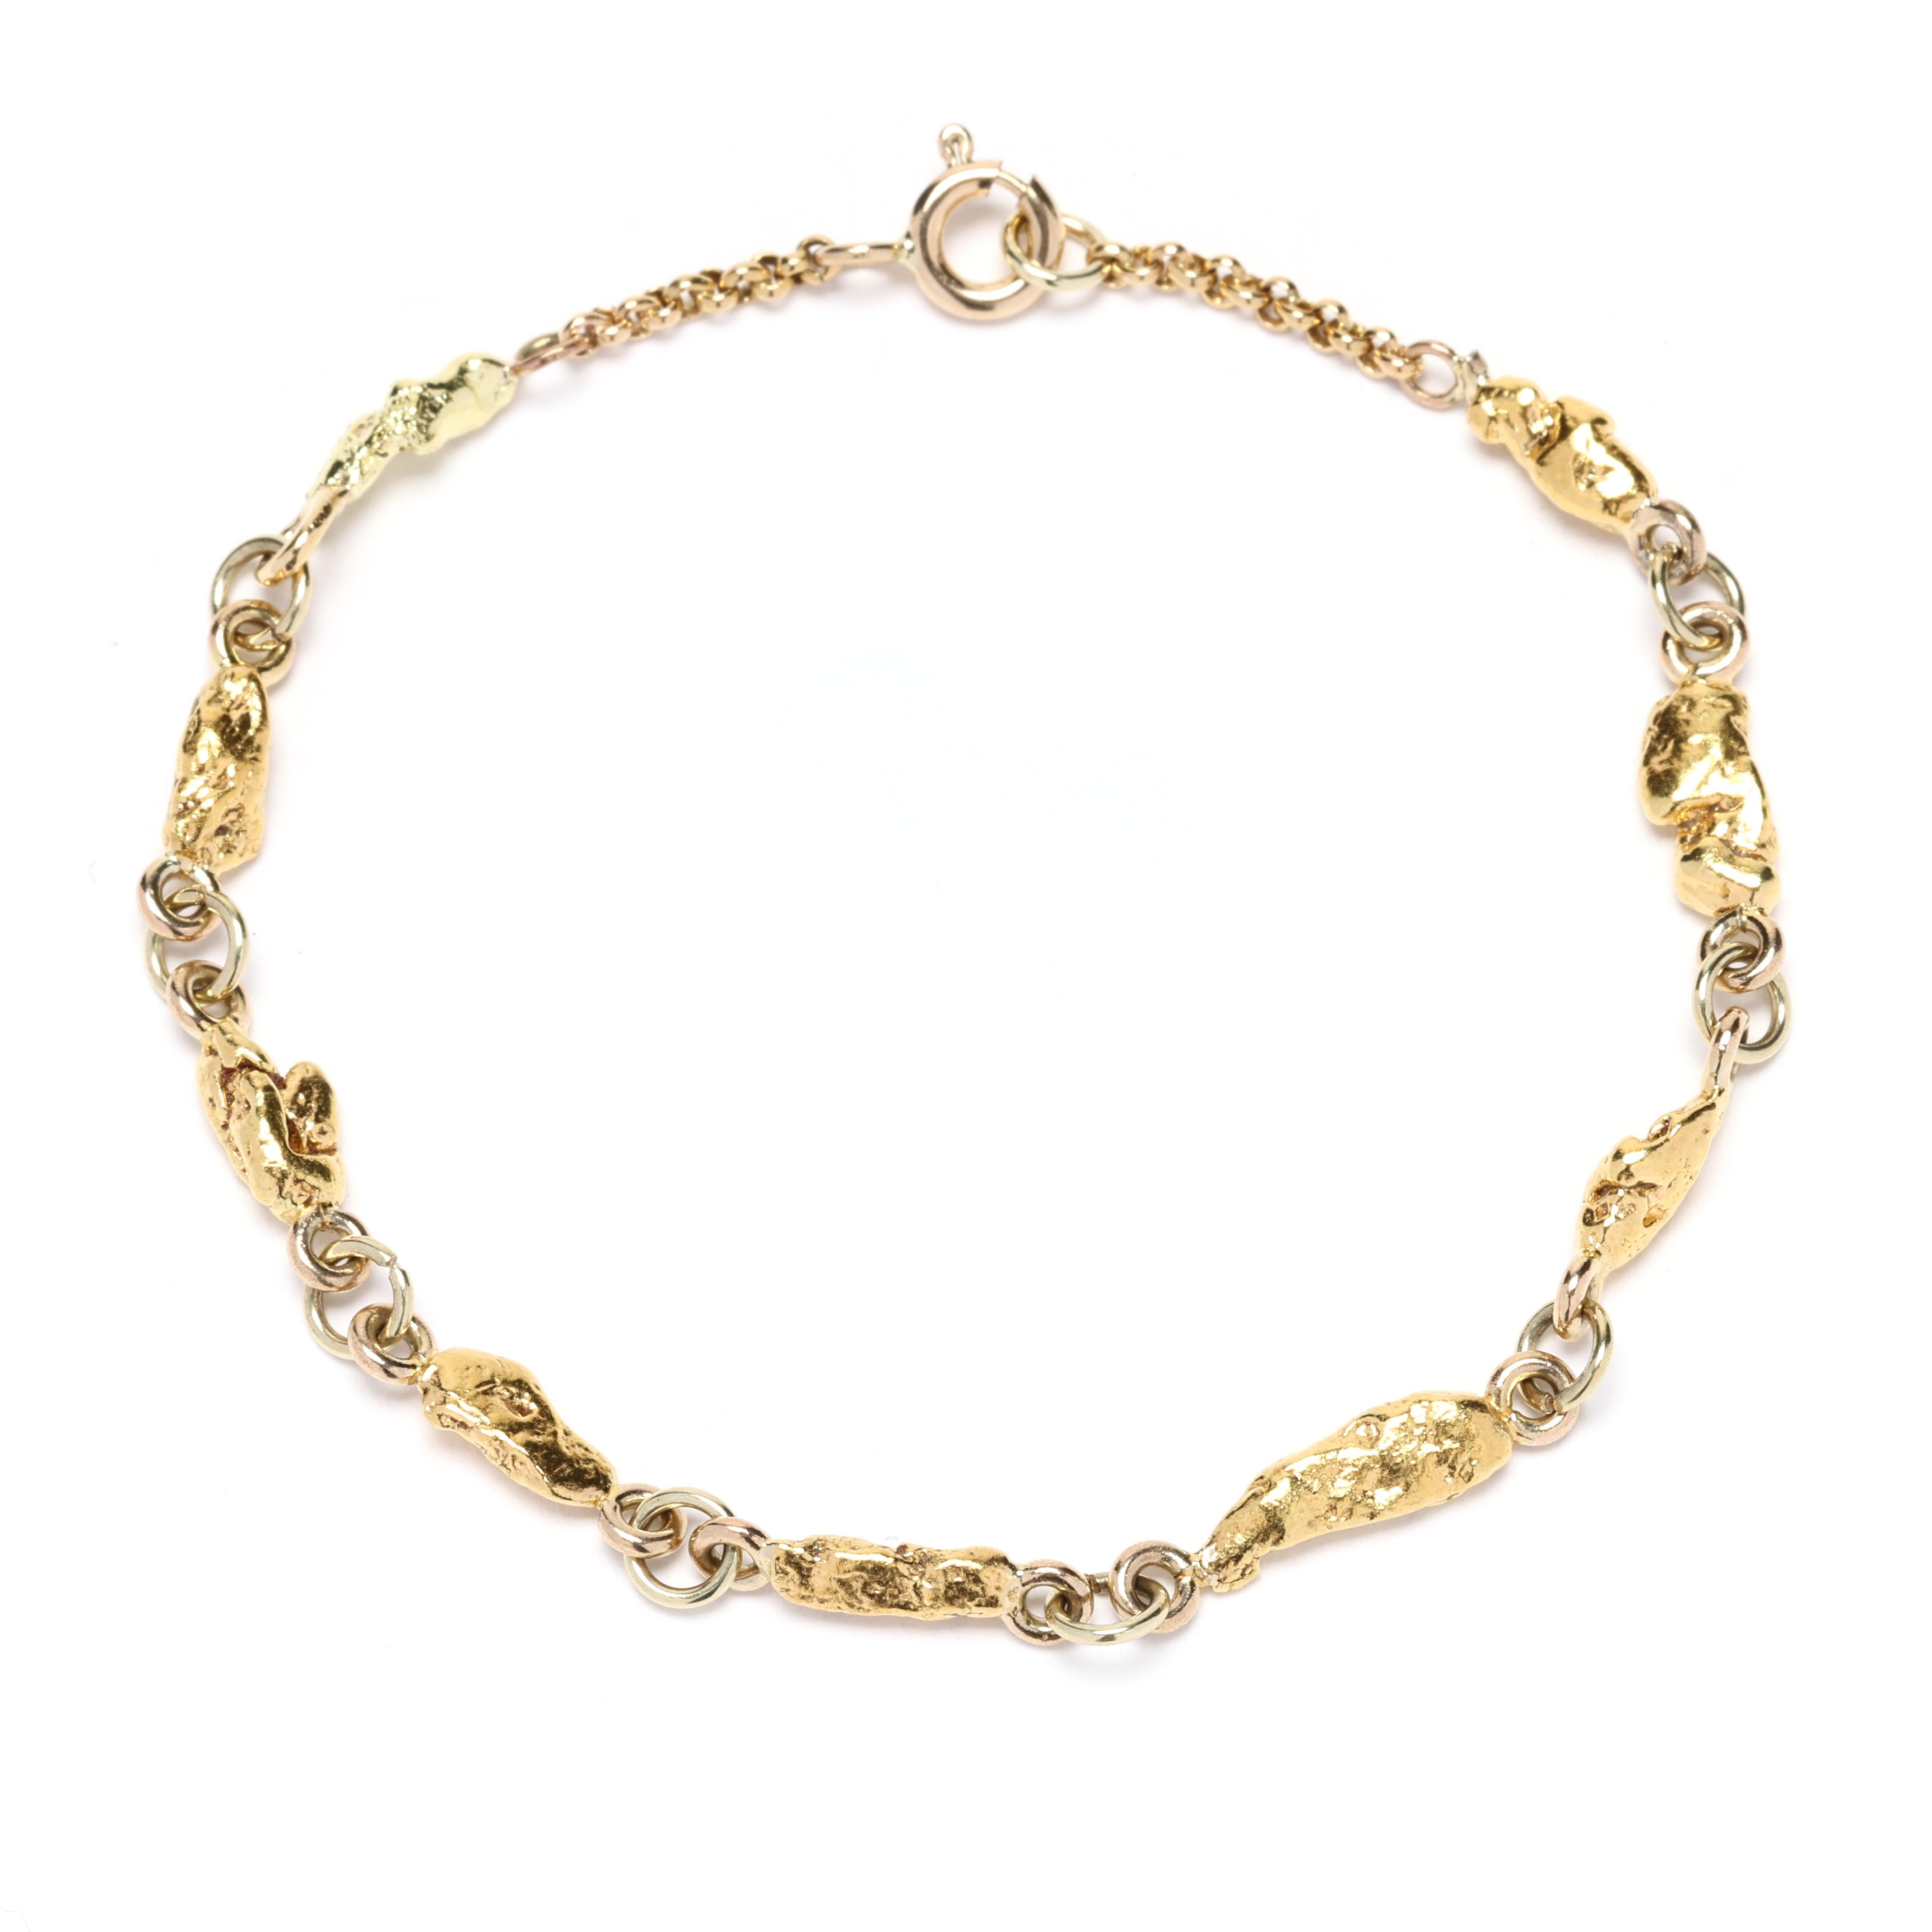 Women's 22k Gold Nugget Bracelet, 18k Yellow Gold Chain, Length 7 Inches, Stackable For Sale